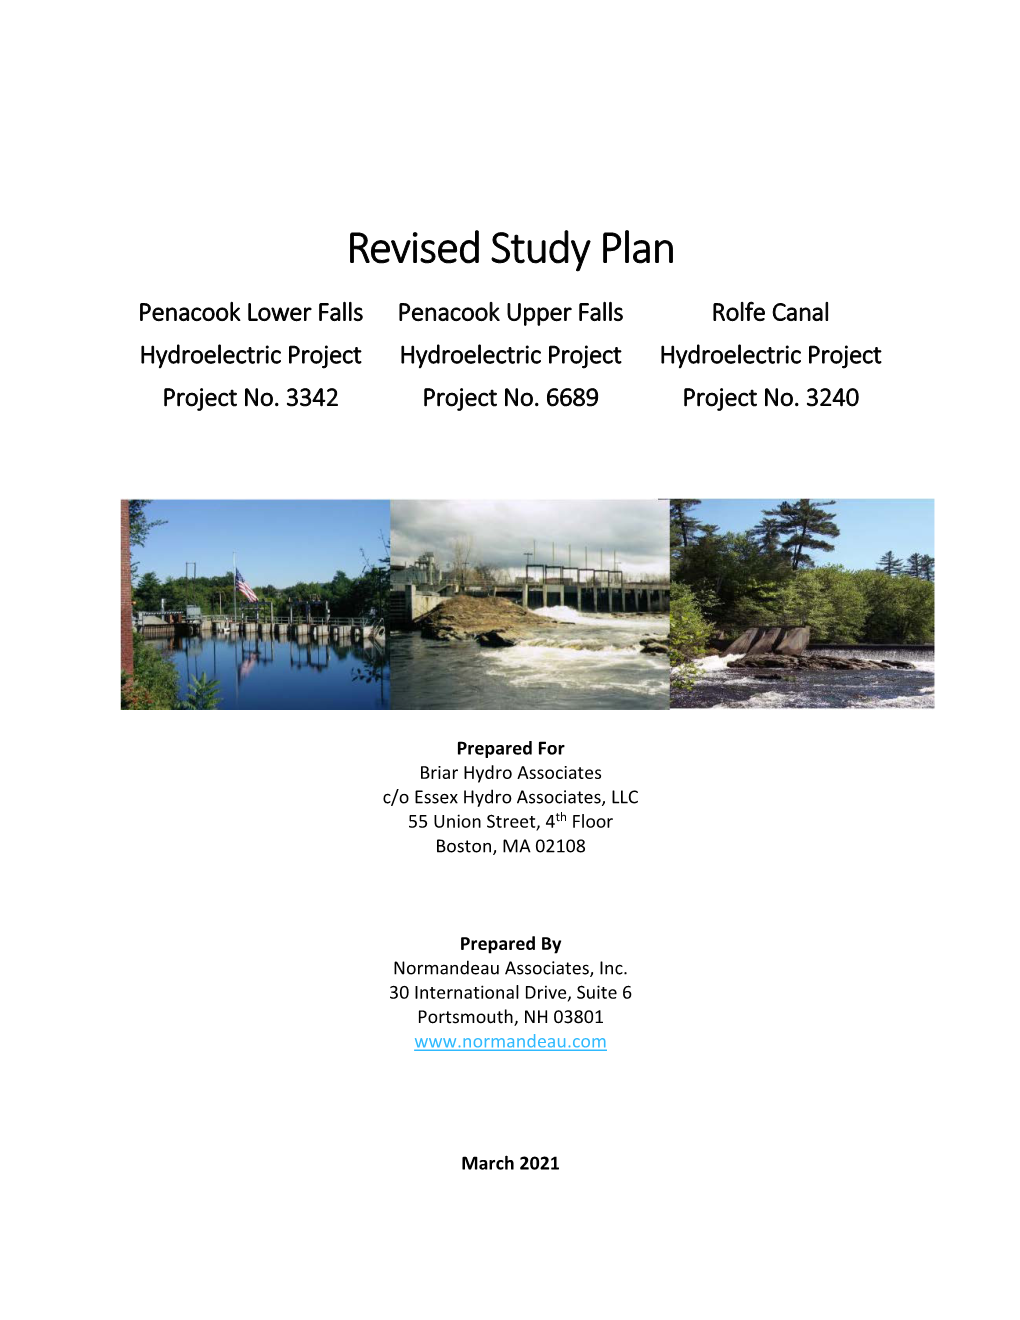 Revised Study Plan Penacook Lower Falls Penacook Upper Falls Rolfe Canal Hydroelectric Project Hydroelectric Project Hydroelectric Project Project No